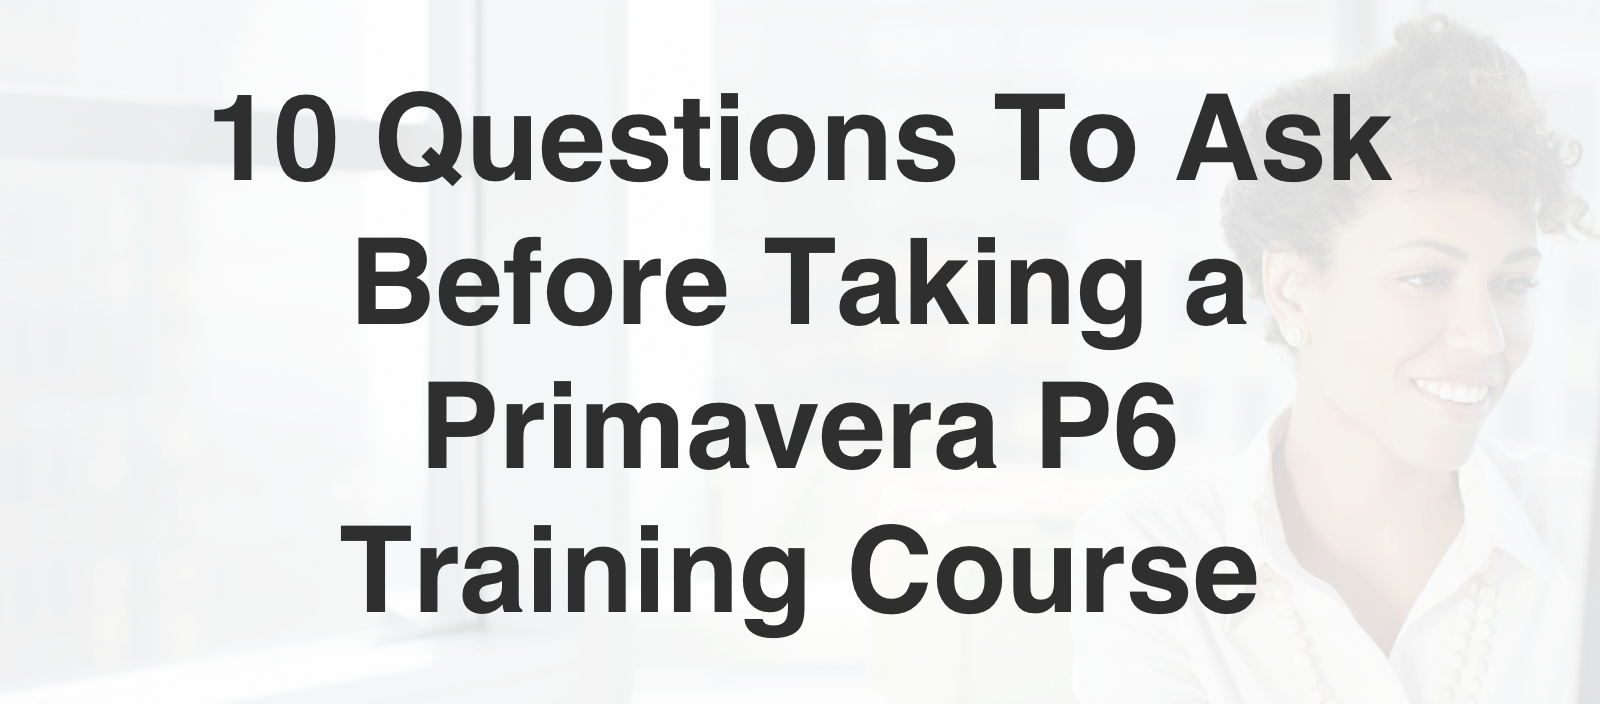 10 Questions To Ask Before Taking a Primavera P6 Training Course